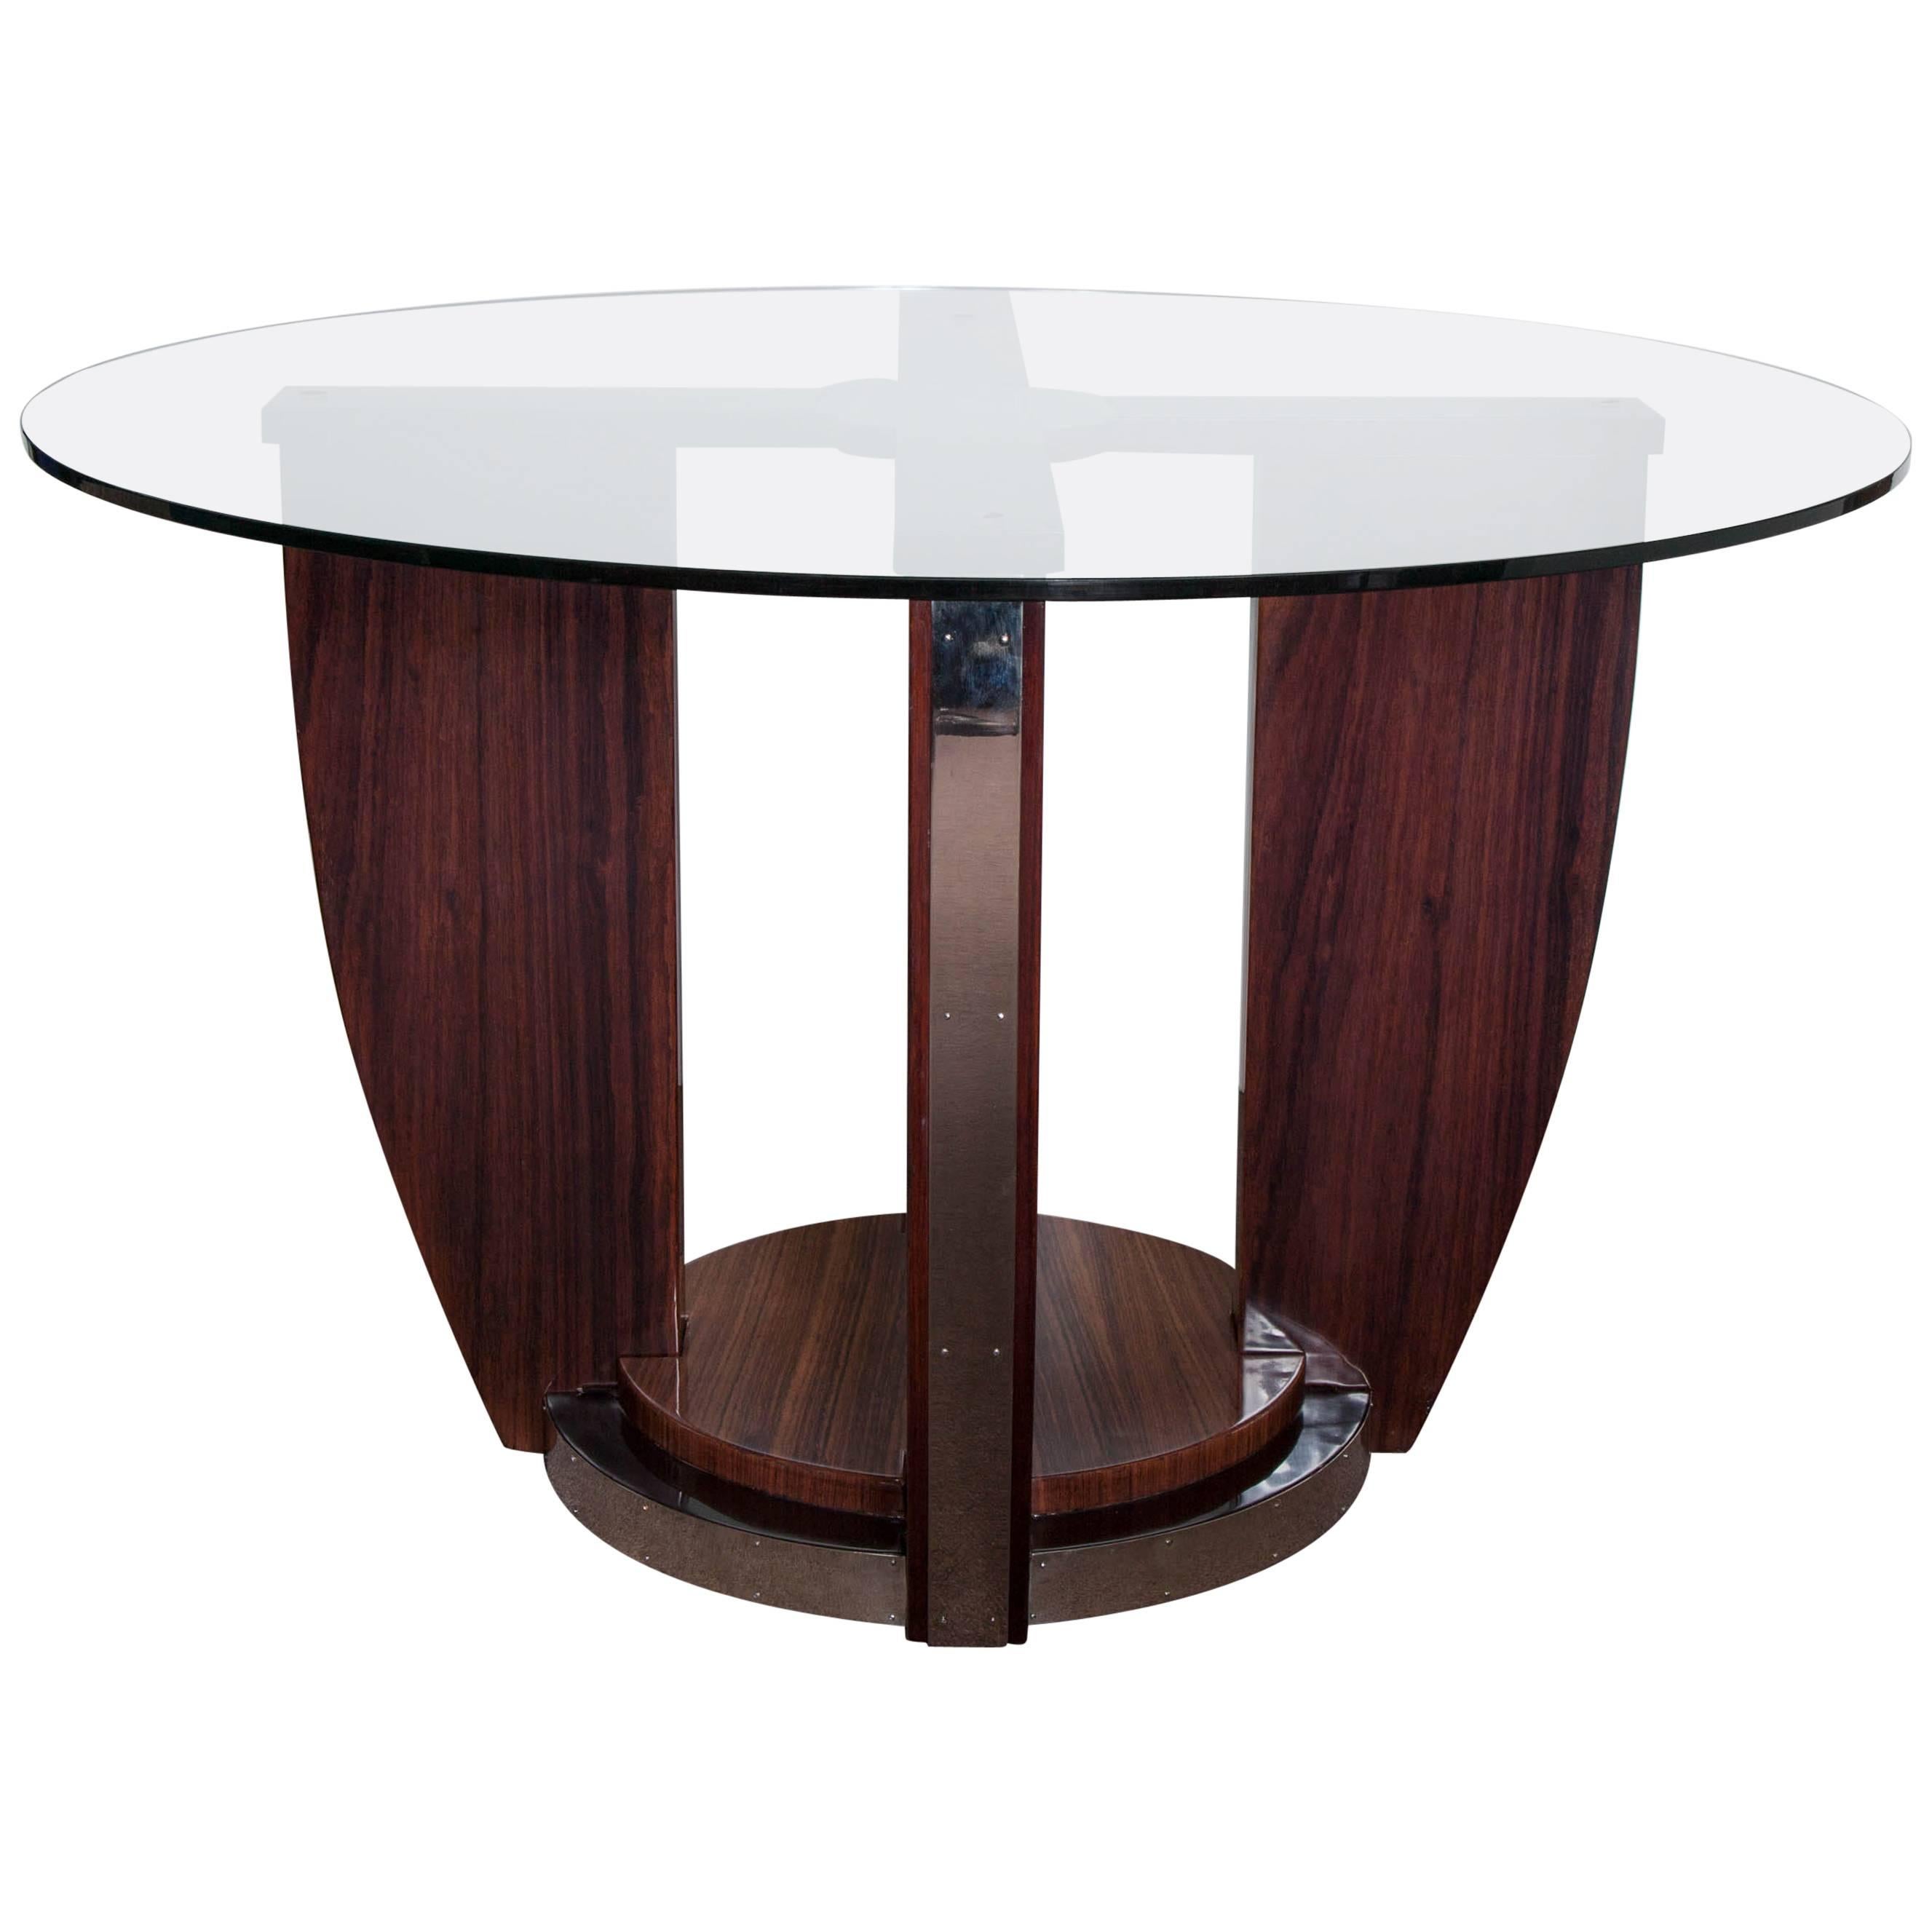 French Art Deco Dining/Center Table in Rosewood and Nickel, Louis Sognot